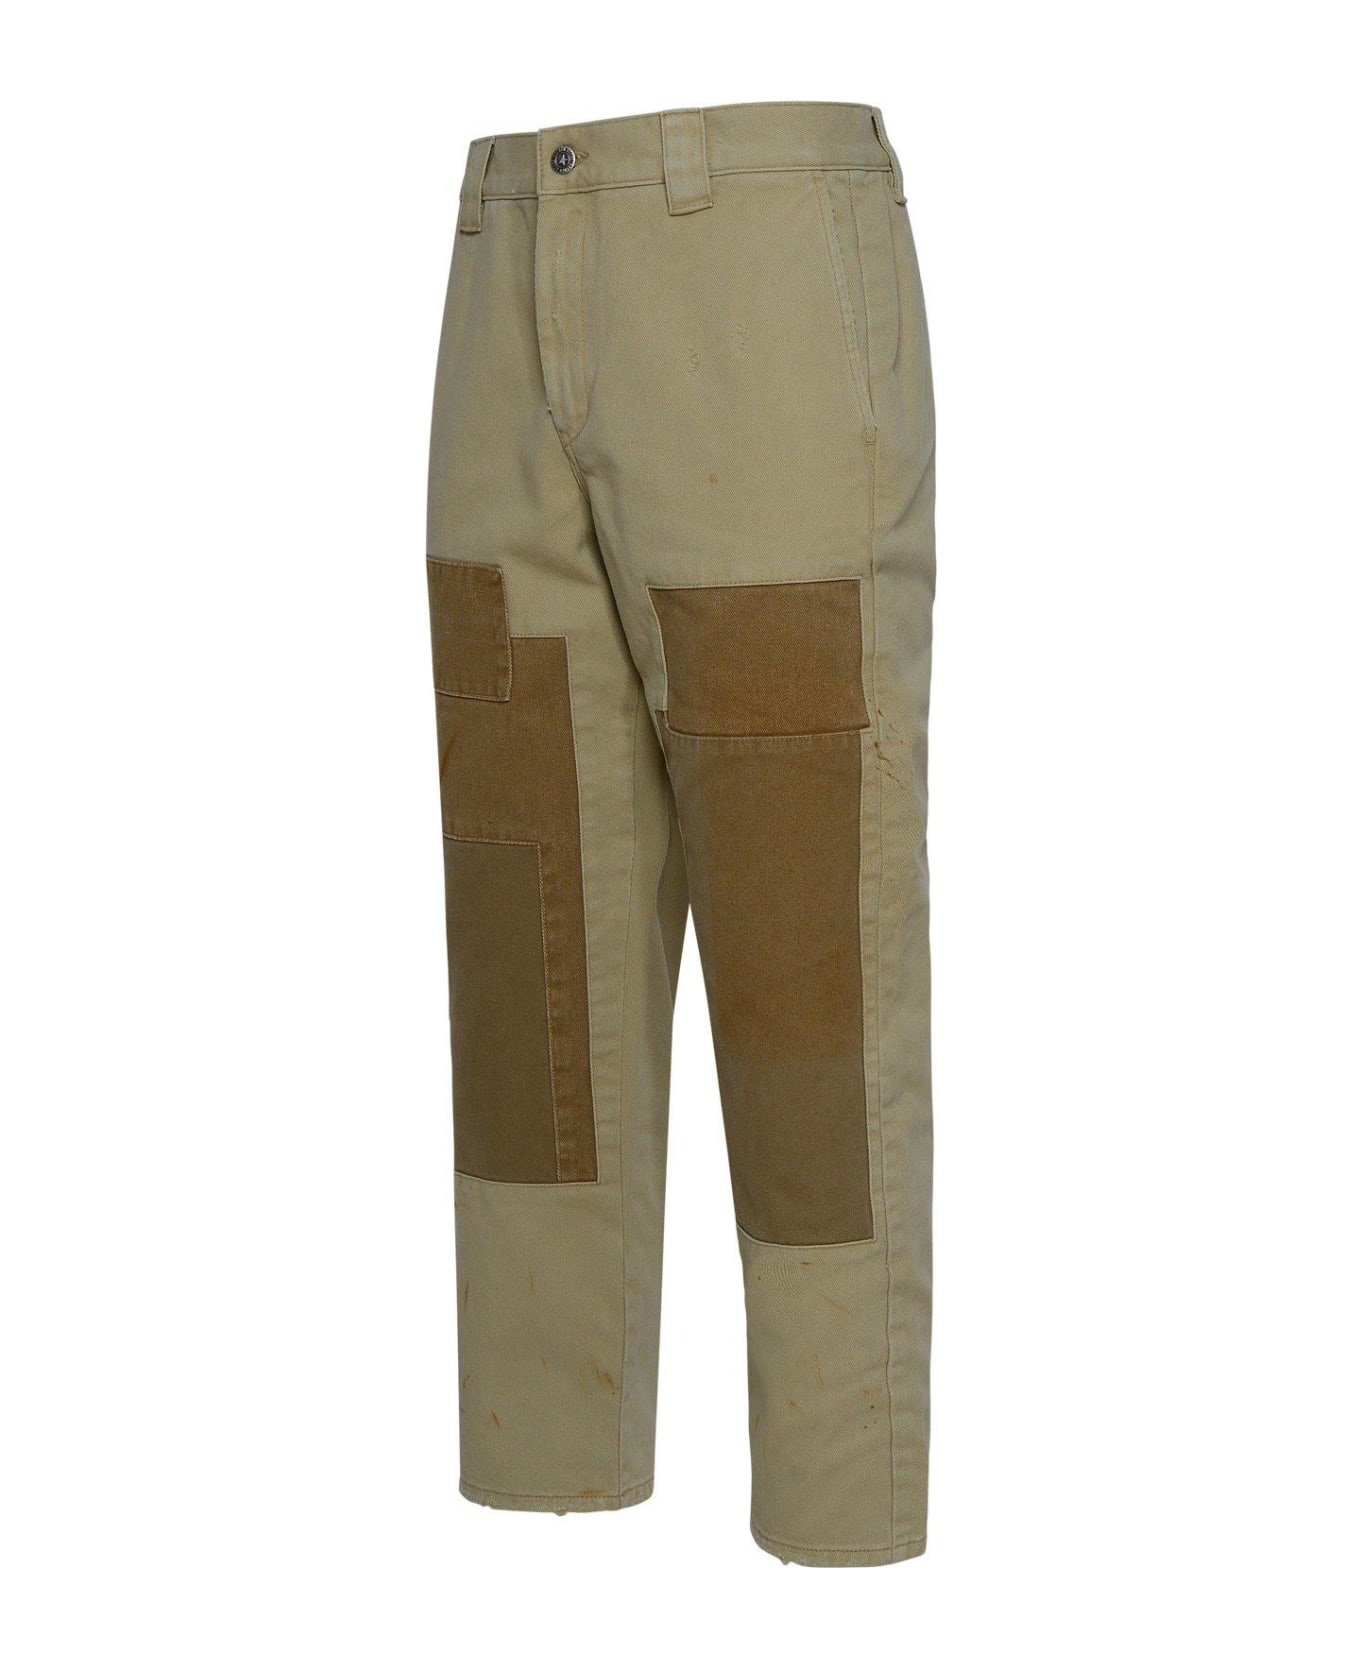 Golden Goose Panlled Trousers - Yellow Cream